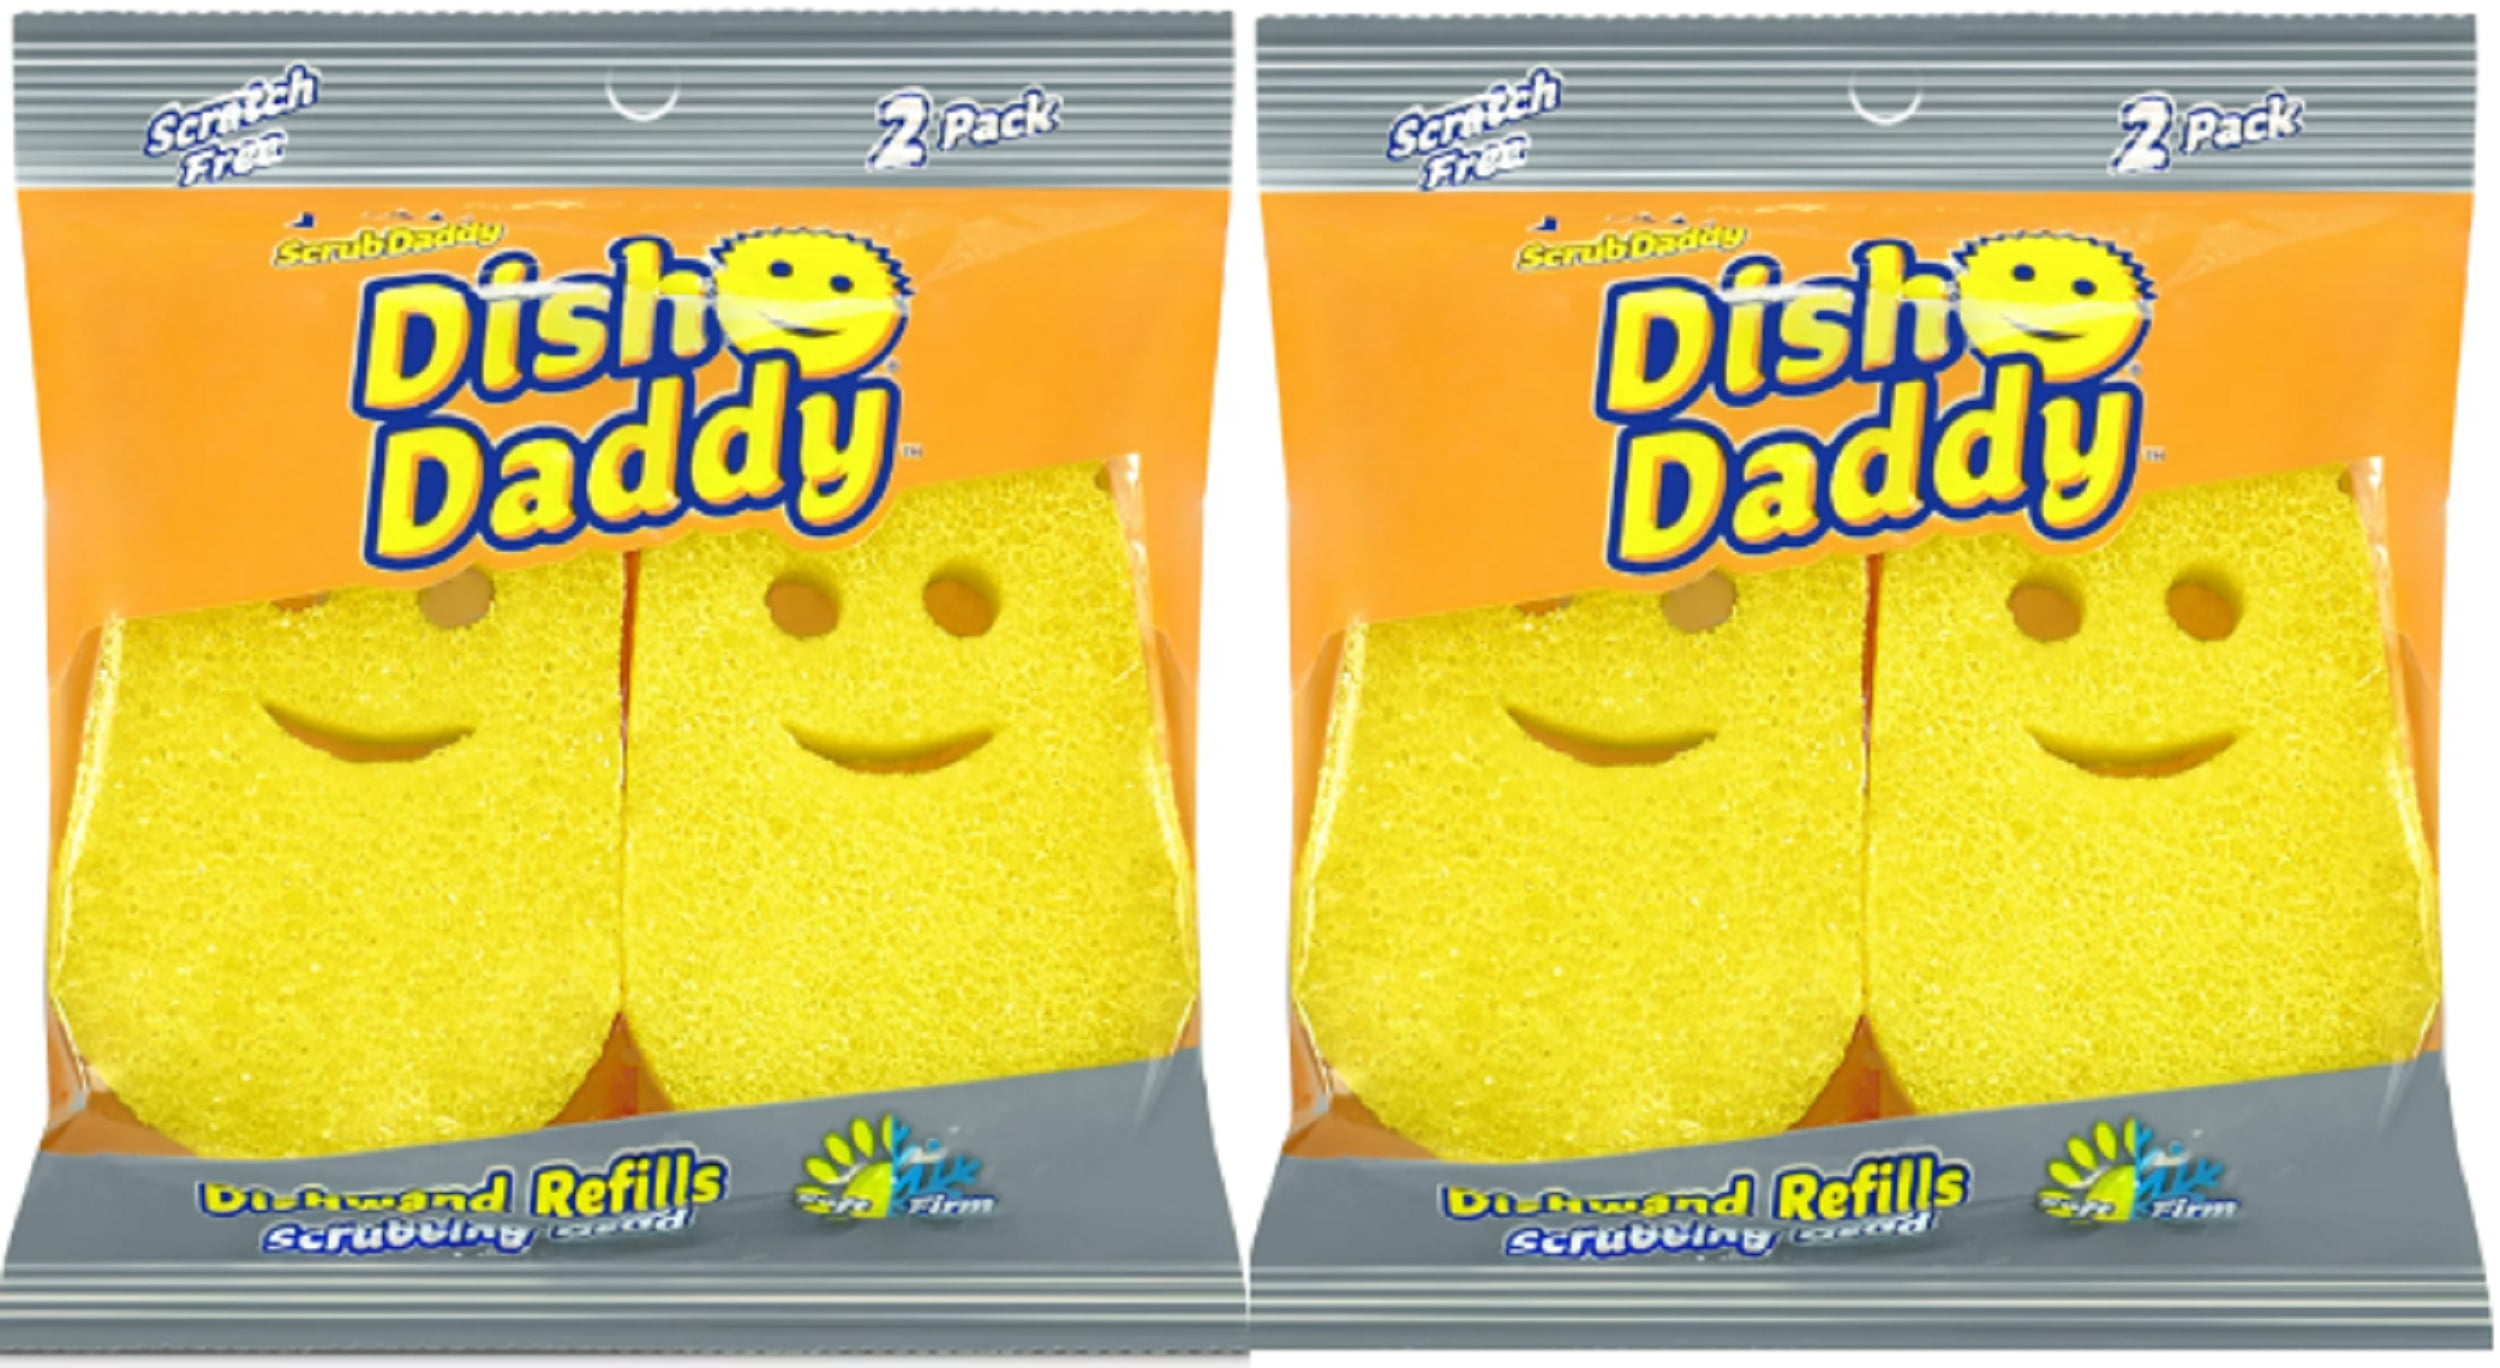 Smilyeez Heavy Duty Refill for Scrub Daddy Dish Daddy – (10 Pack) Dish Daddy Refills – Dish Daddy Sponge Replacement Head – Ideal for Dishwashing